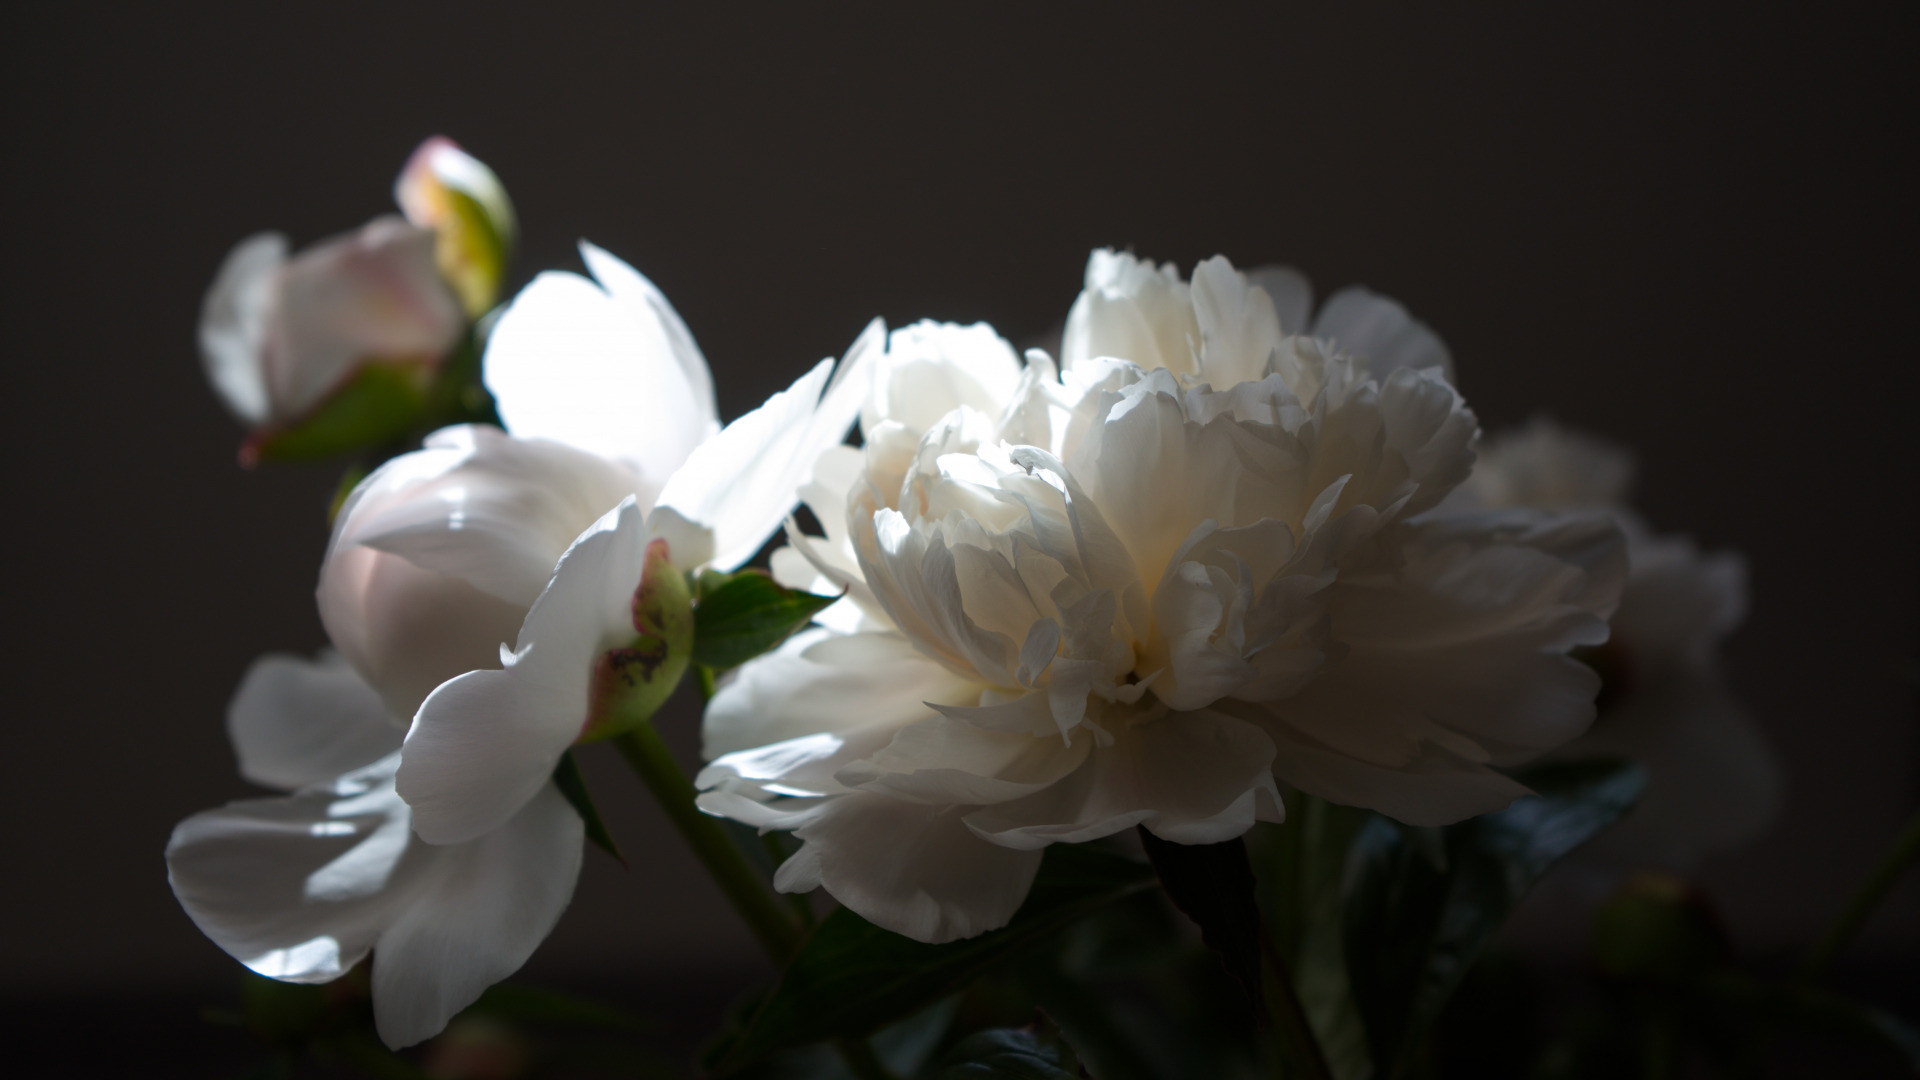 1920x1080 Download wallpaper flowers, peony, bouquet of peonies, white peony, section flowers in resoluti